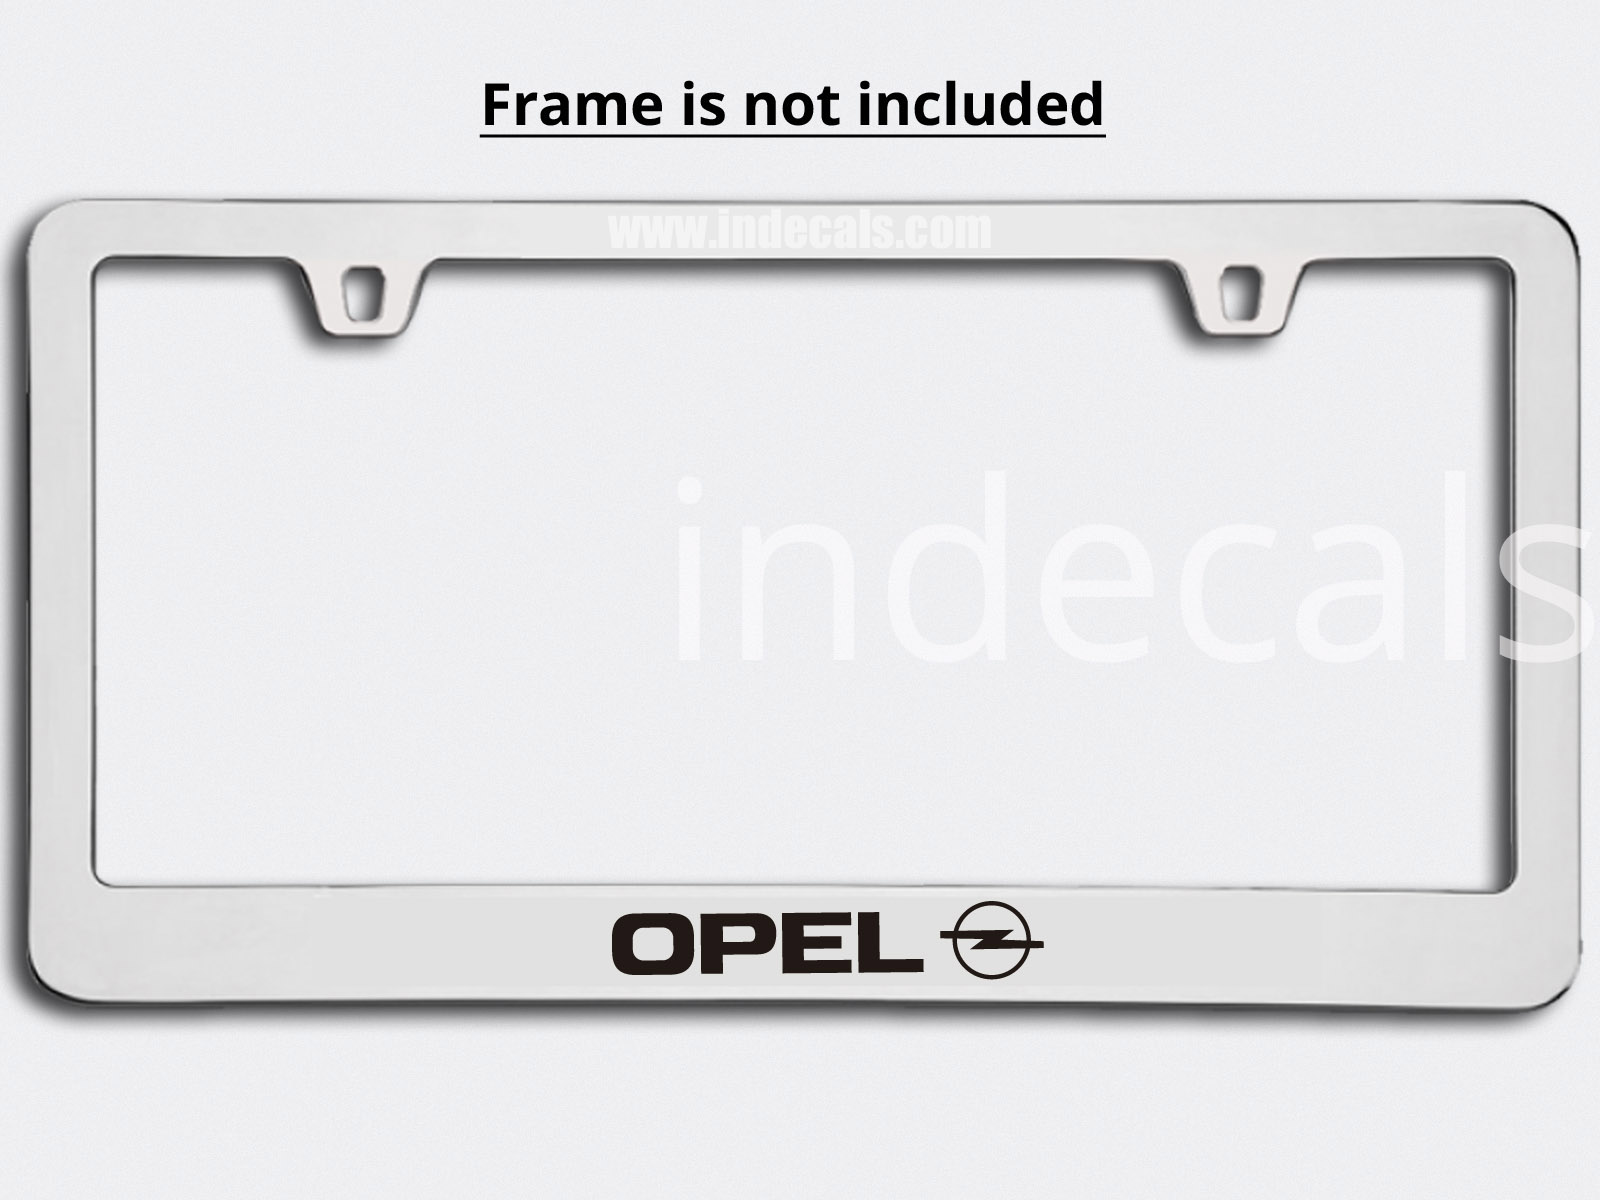 3 x Opel Stickers for Plate Frame - Black